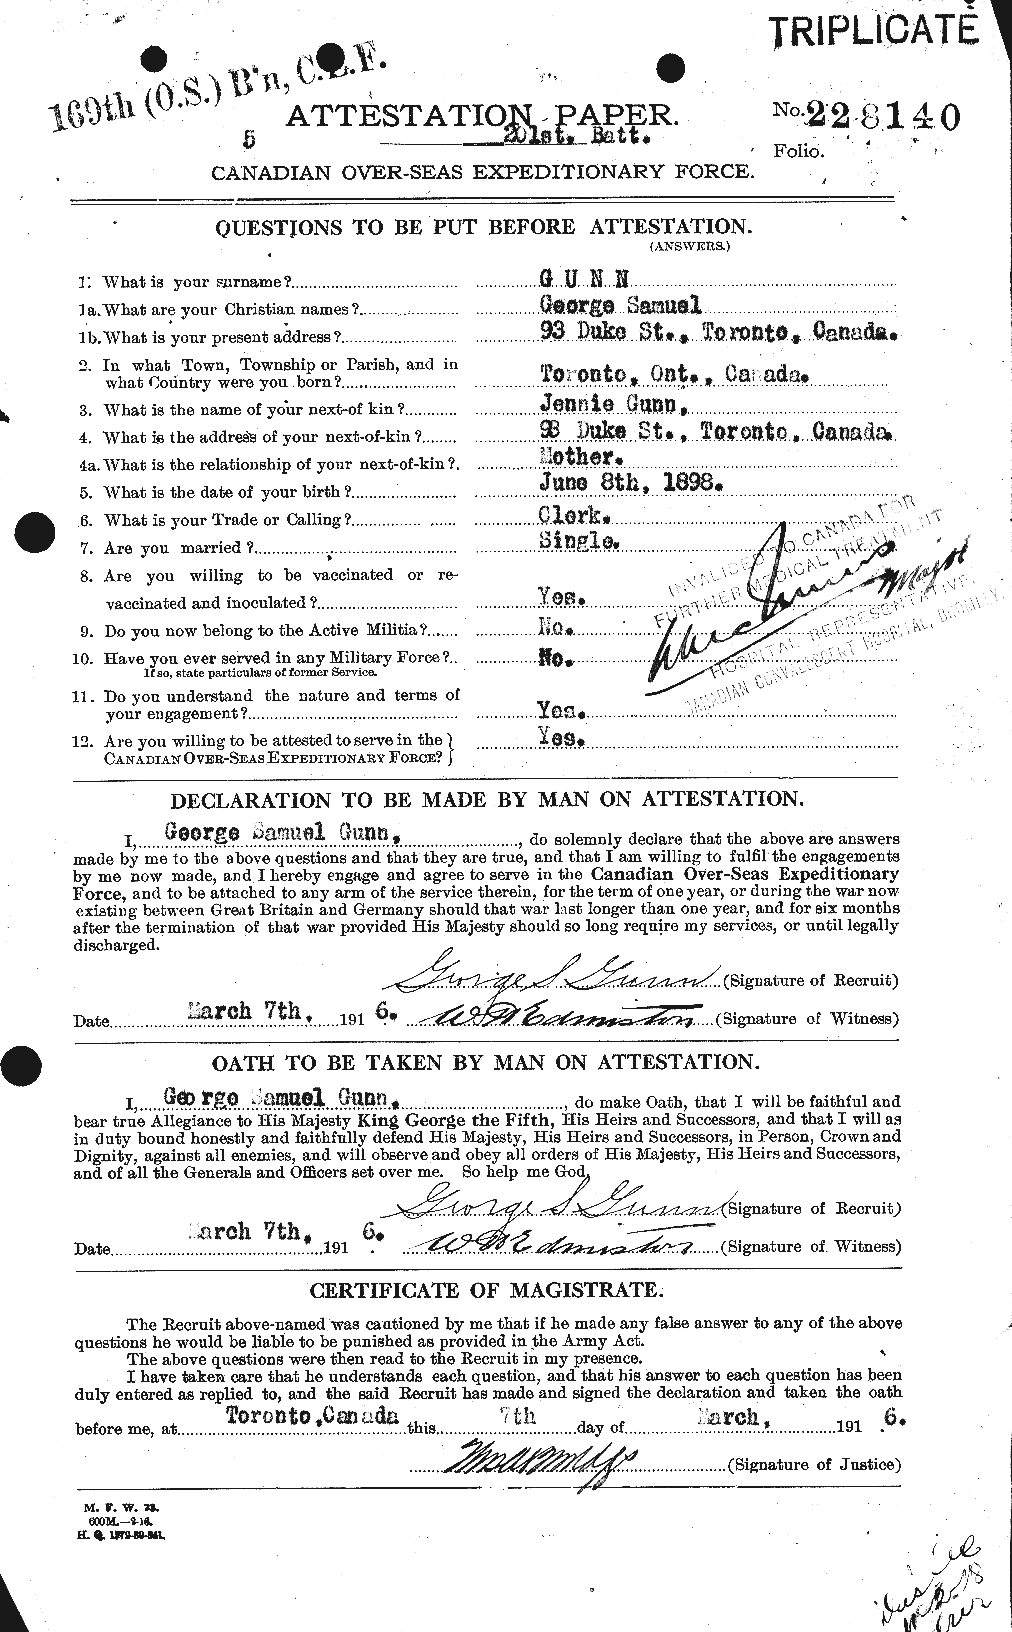 Personnel Records of the First World War - CEF 369245a